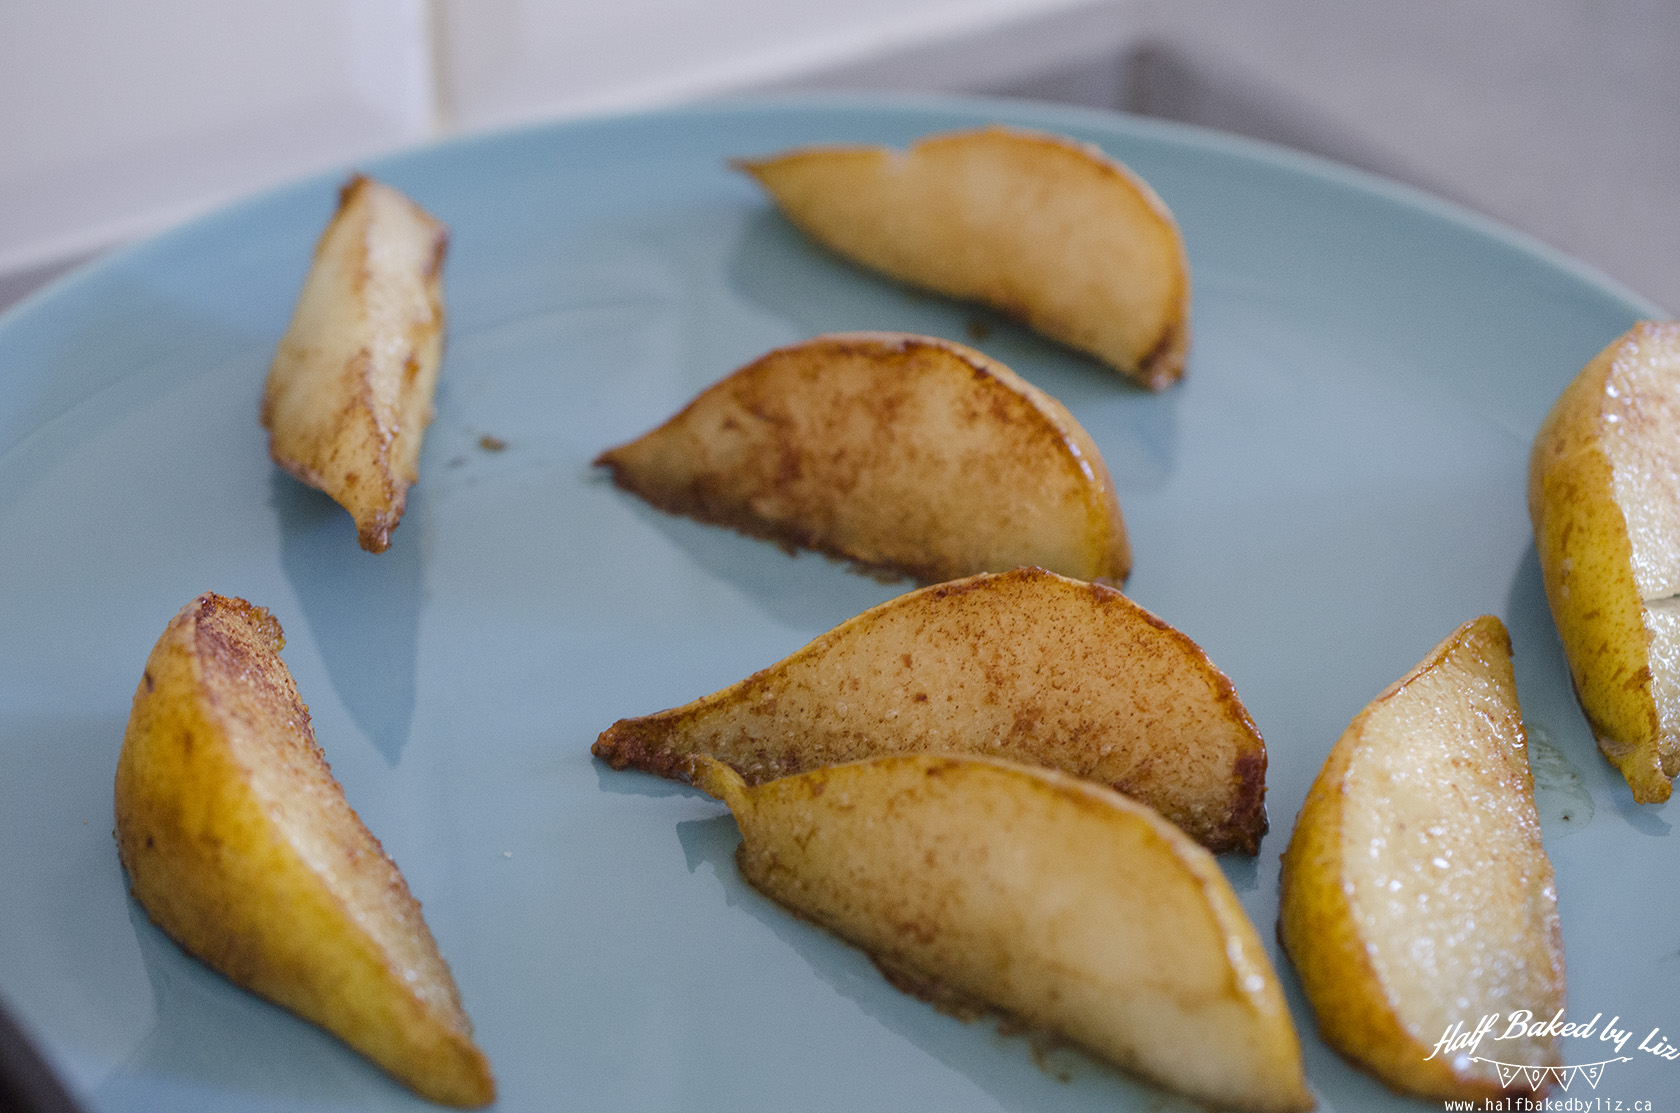 4 - Finished Pears